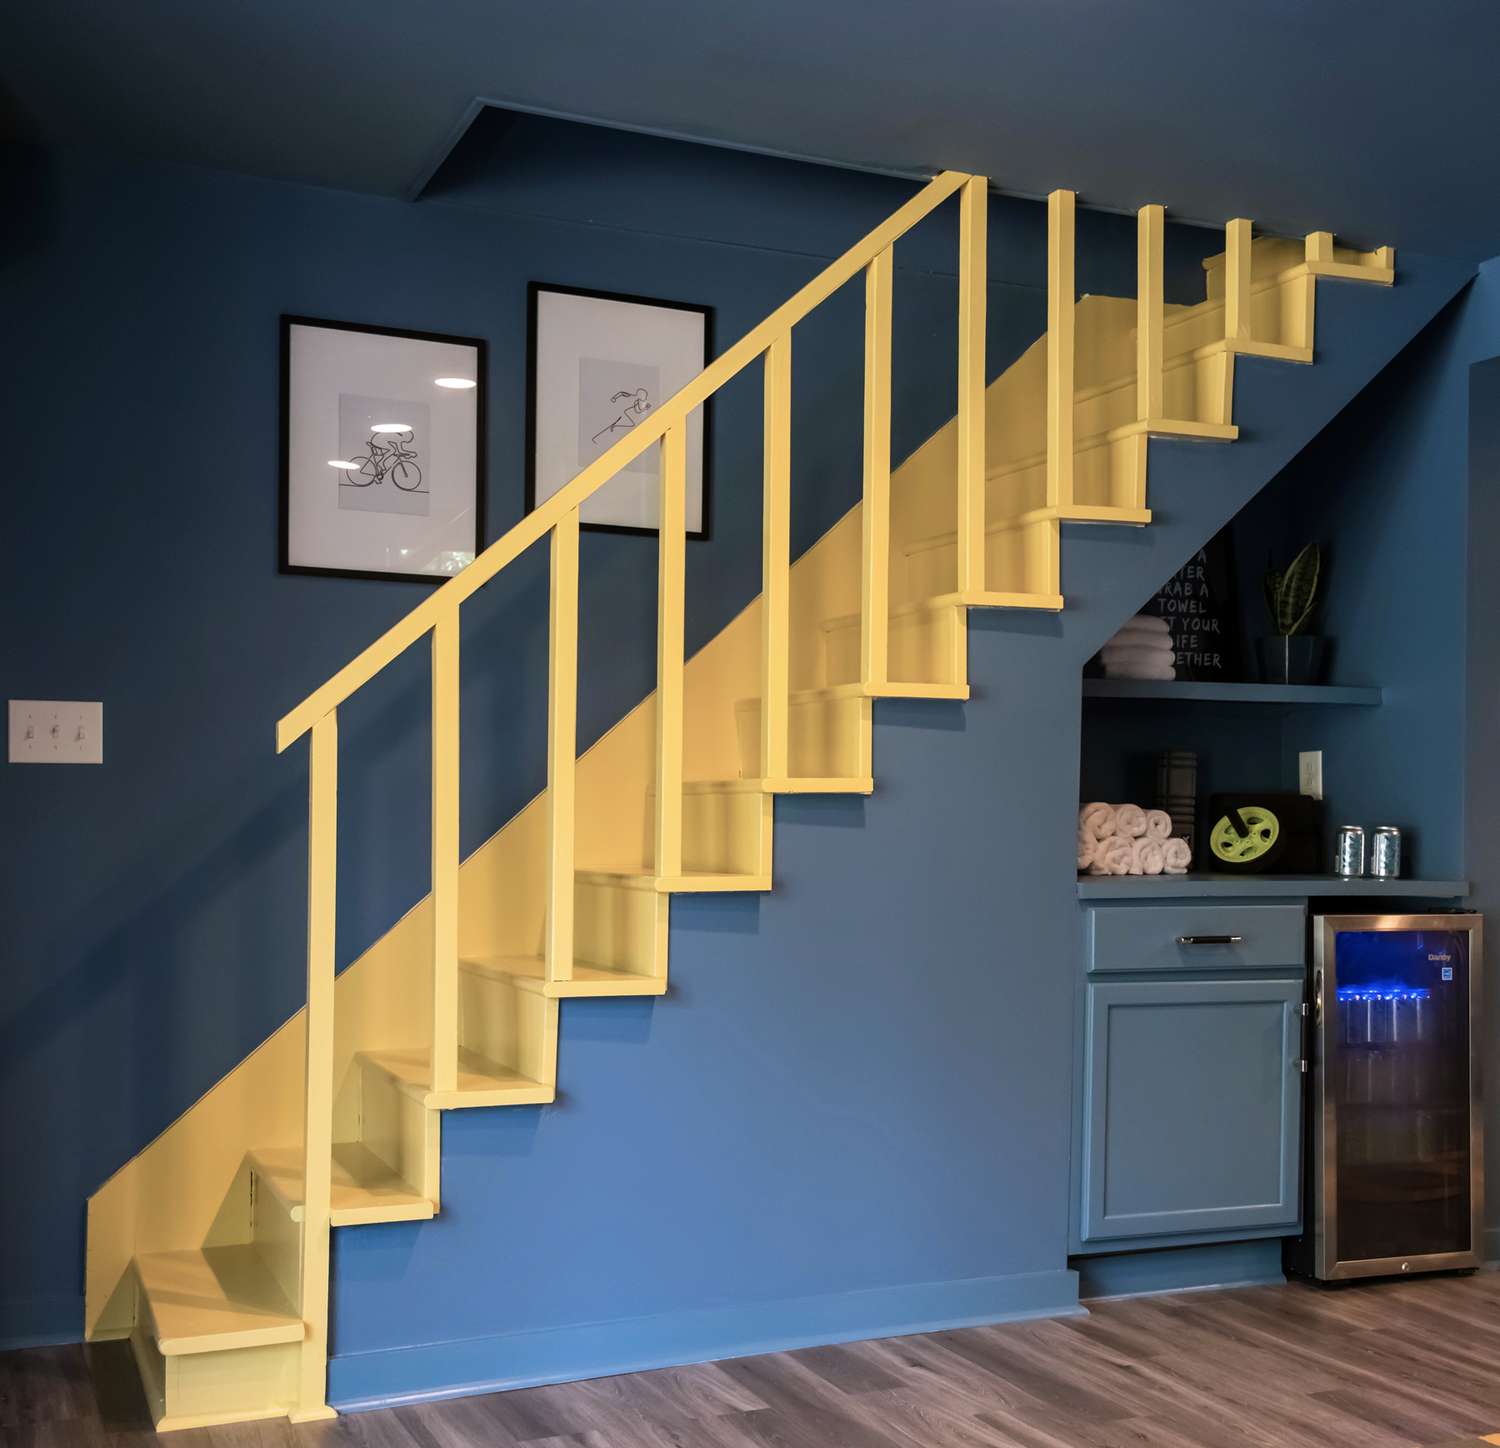 inky blue basement with yellow stairs